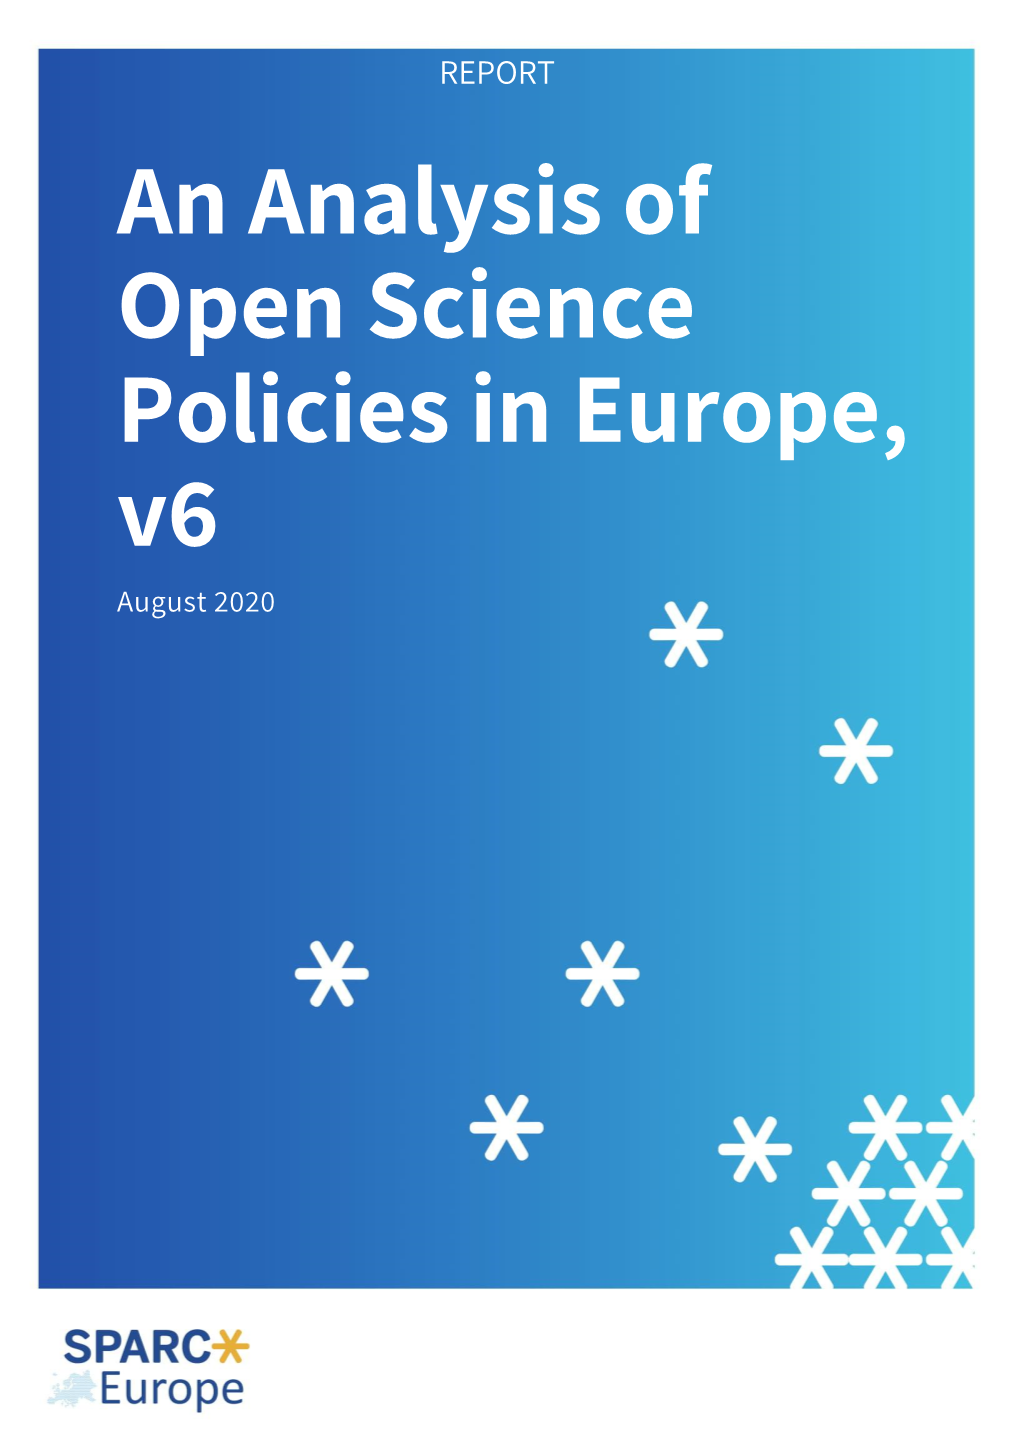 An Analysis of Open Science Policies in Europe, V6 August 2020